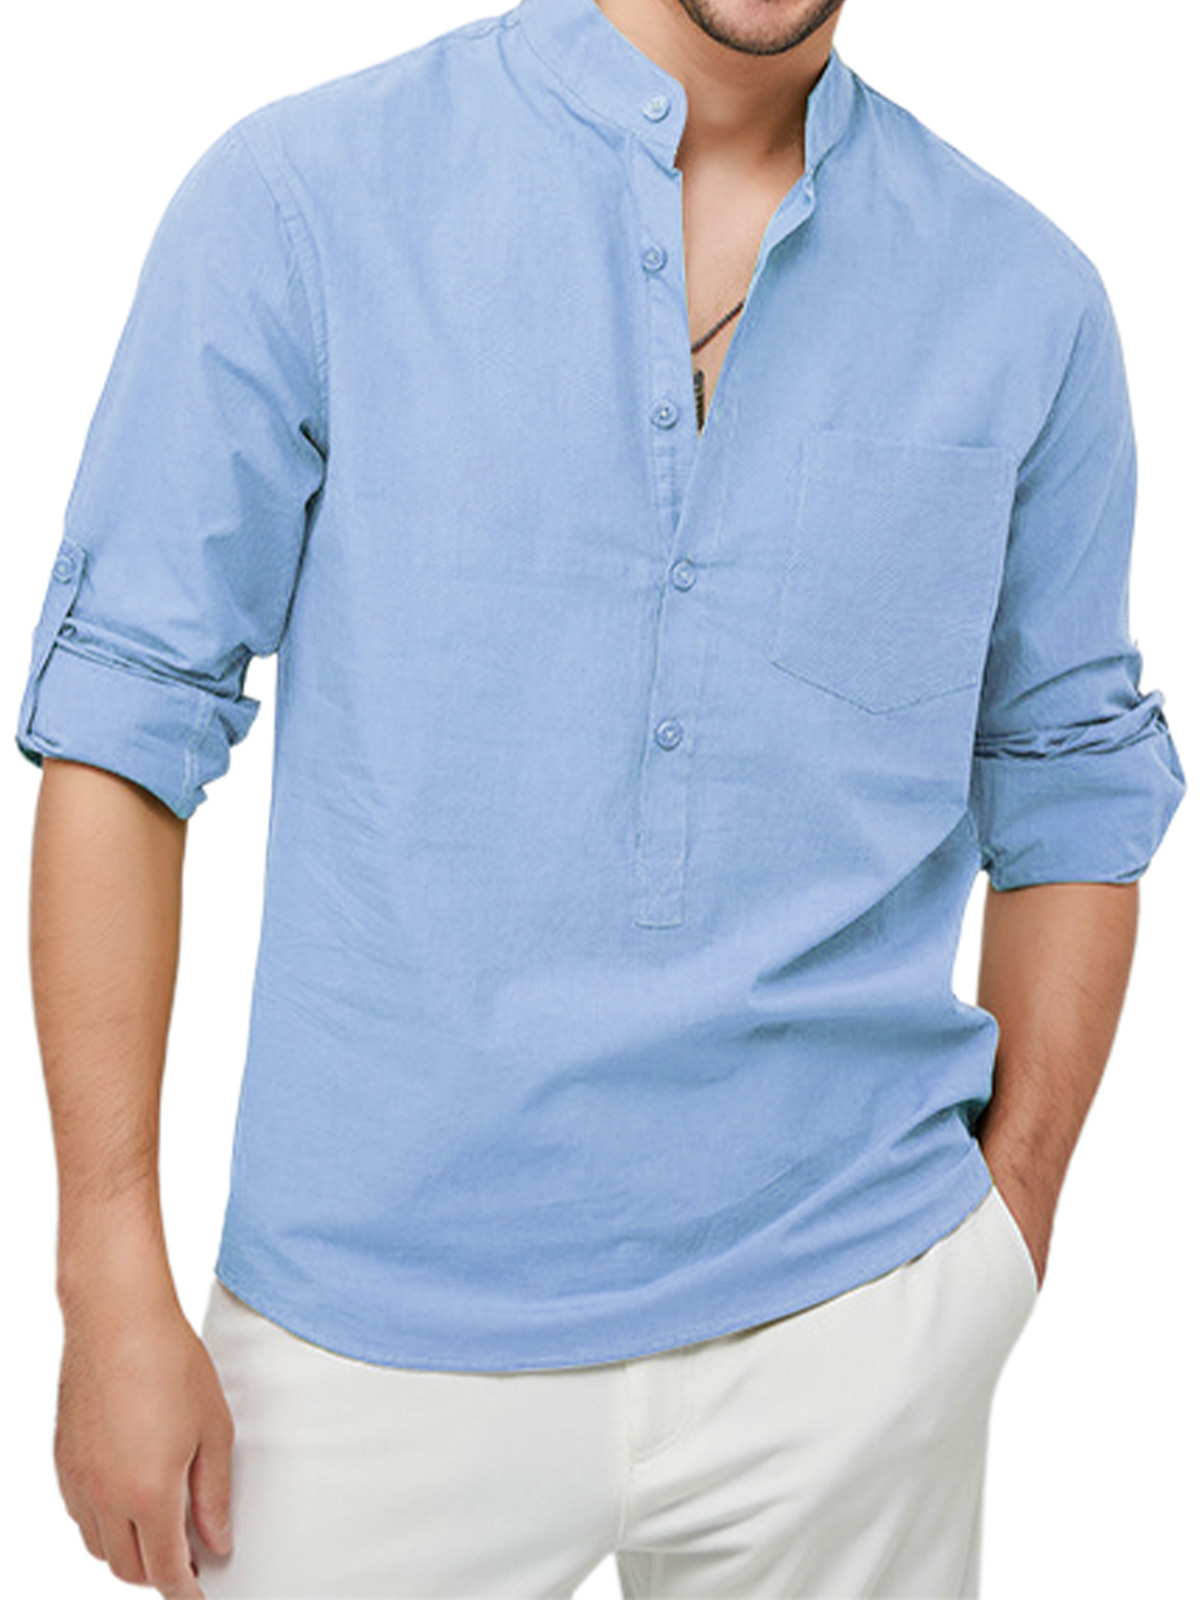 Men's cotton and linen solid color henley long sleeve shirt